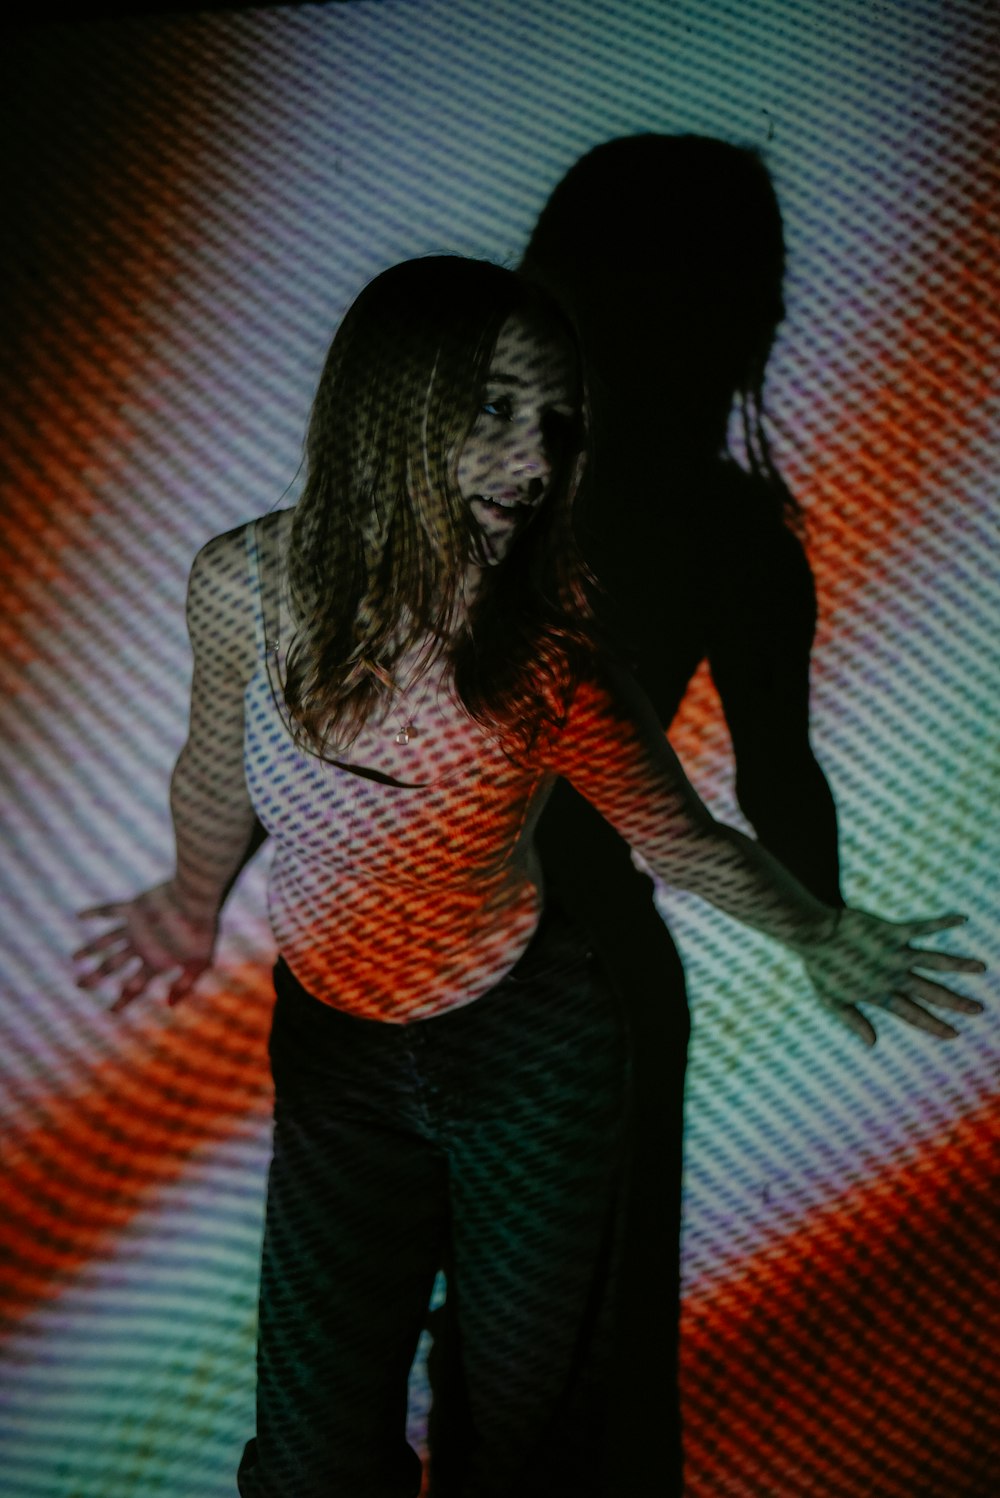 a woman standing in front of a projection screen